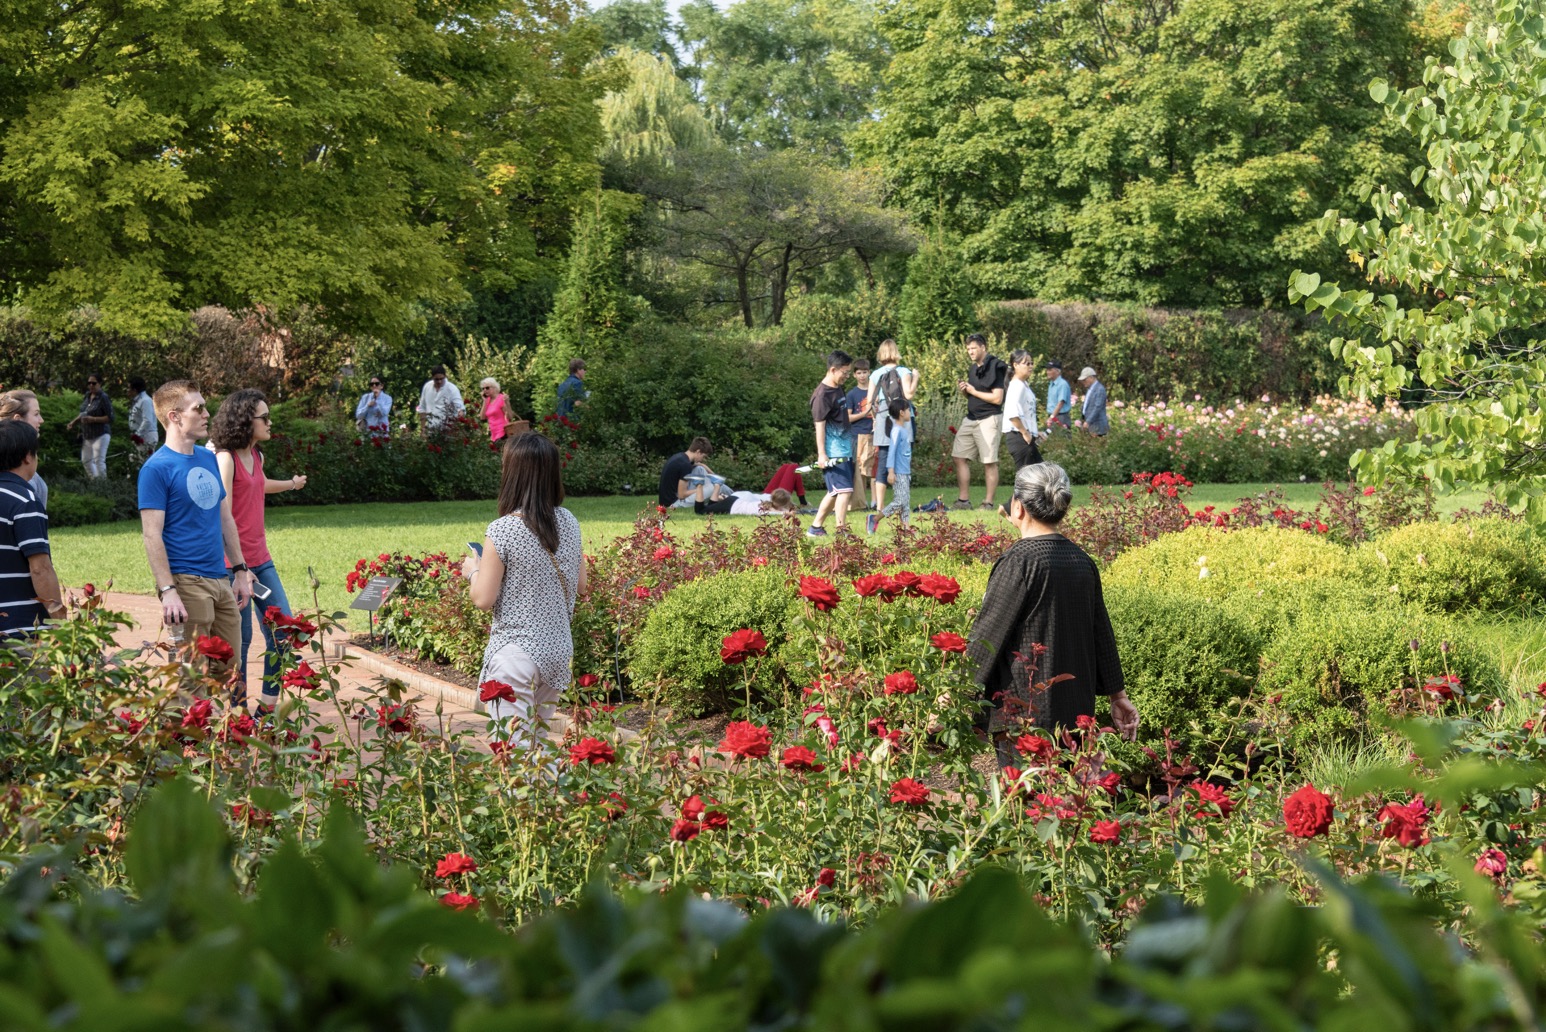 Entry fees, parking rates and free days now that Chicago Botanic Garden